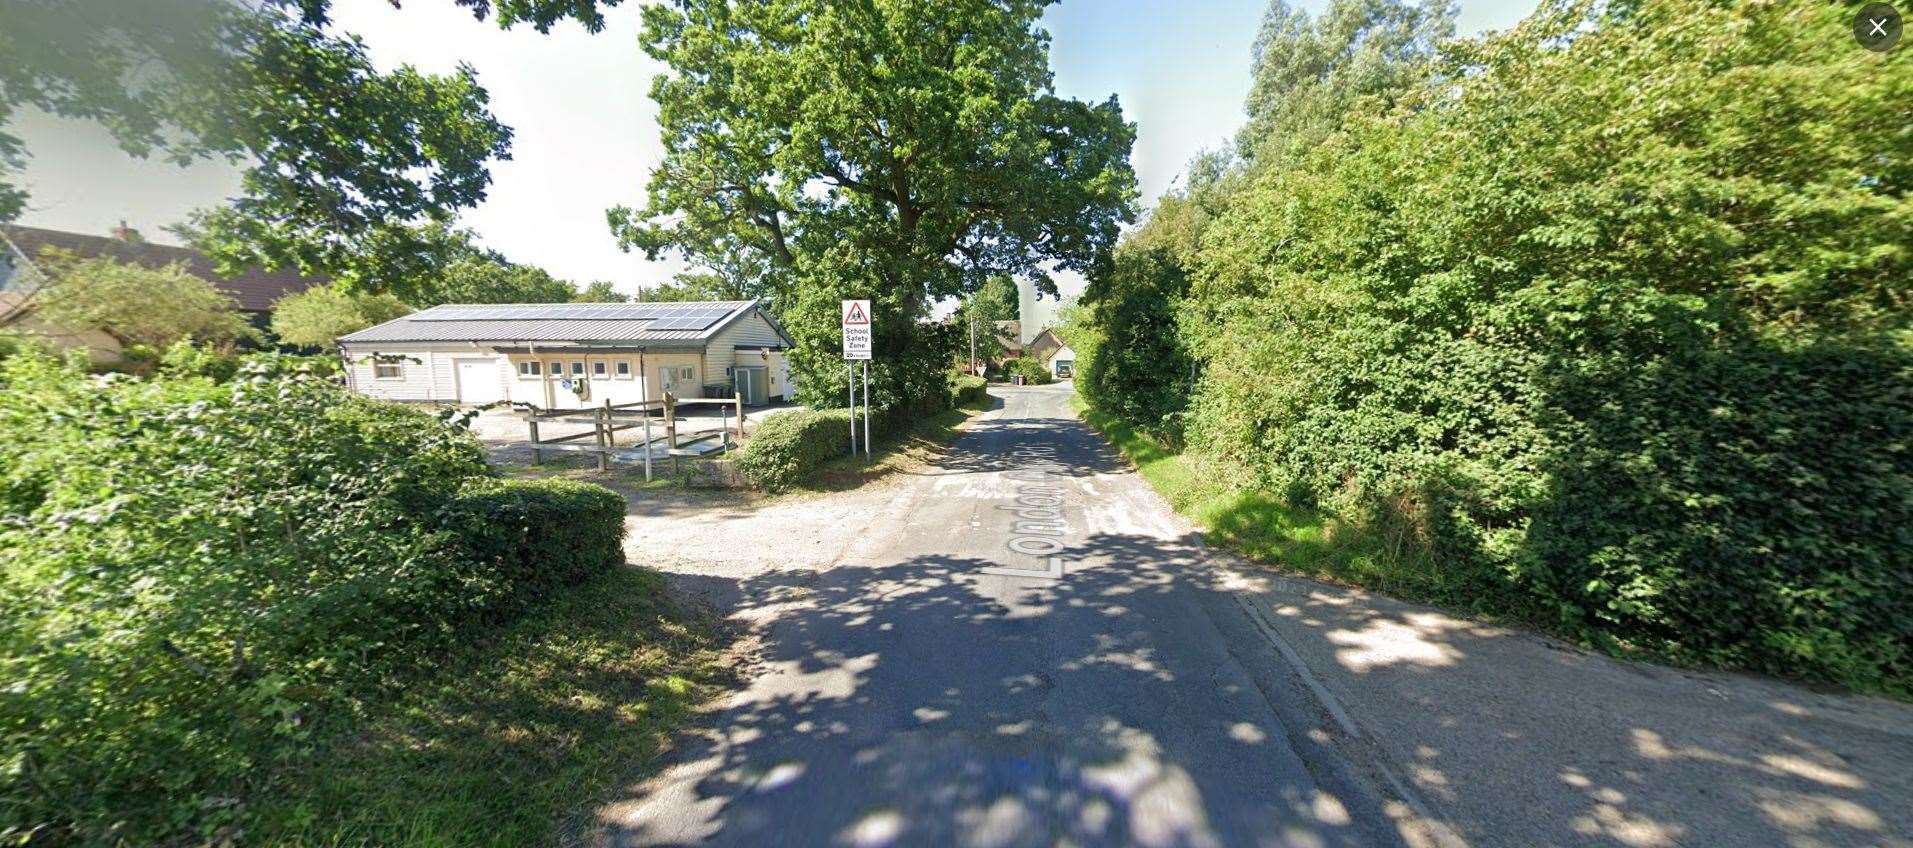 London City Road, in Wilby, near Eye, where an incident of indecent exposure was reported to police on New Year's Day. Picture: Google Maps